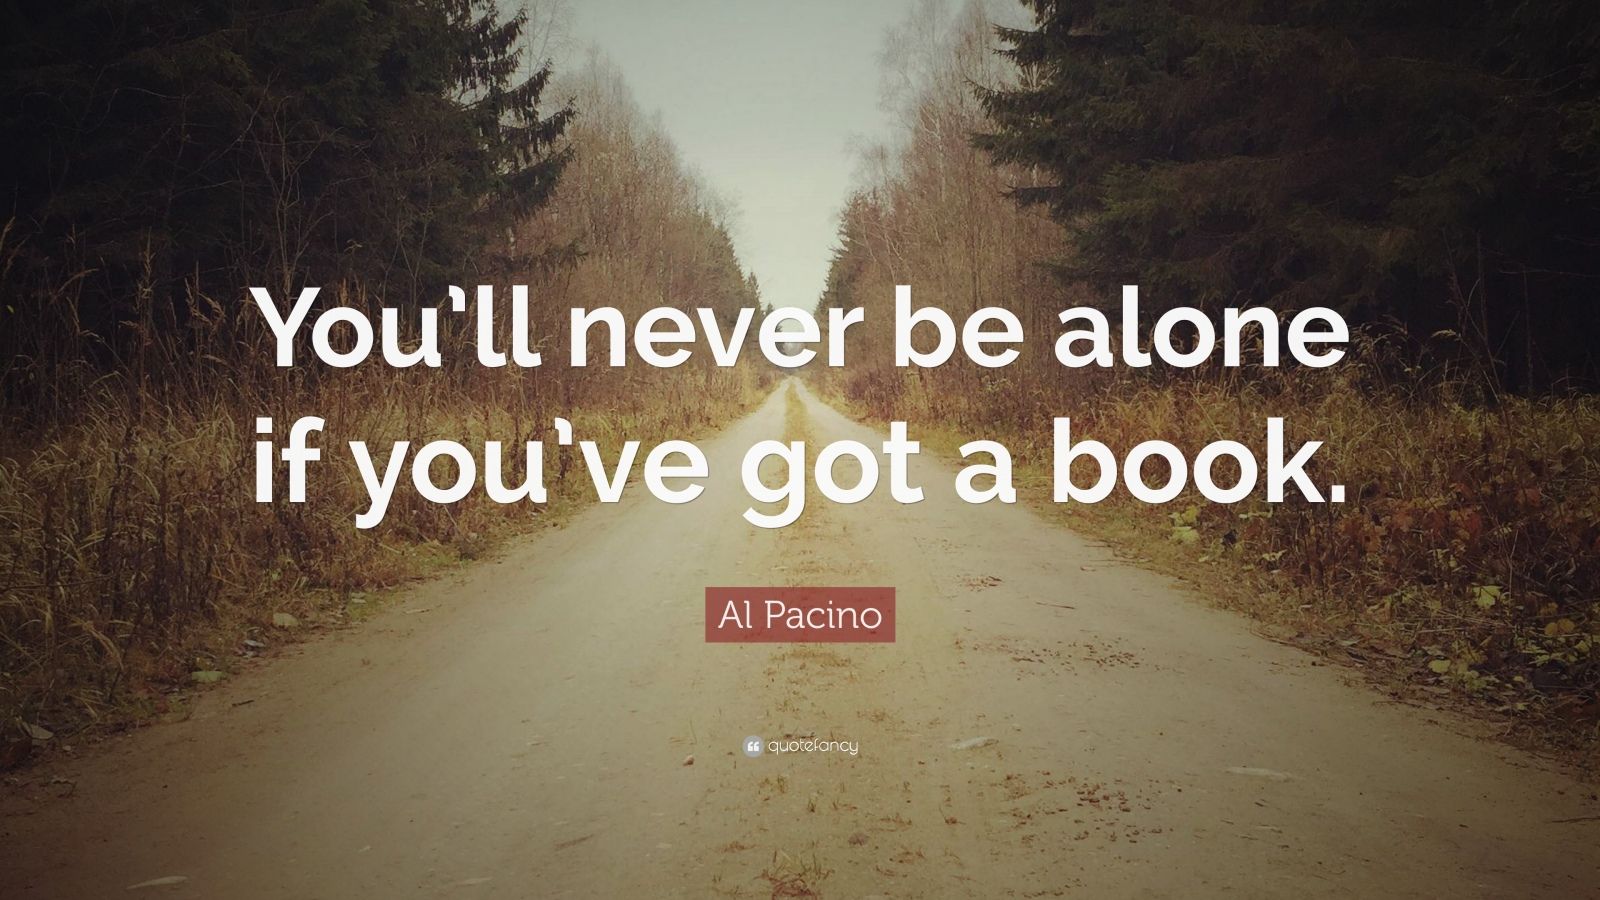 Al Pacino Quote: “You’ll never be alone if you’ve got a book.” (10 ...